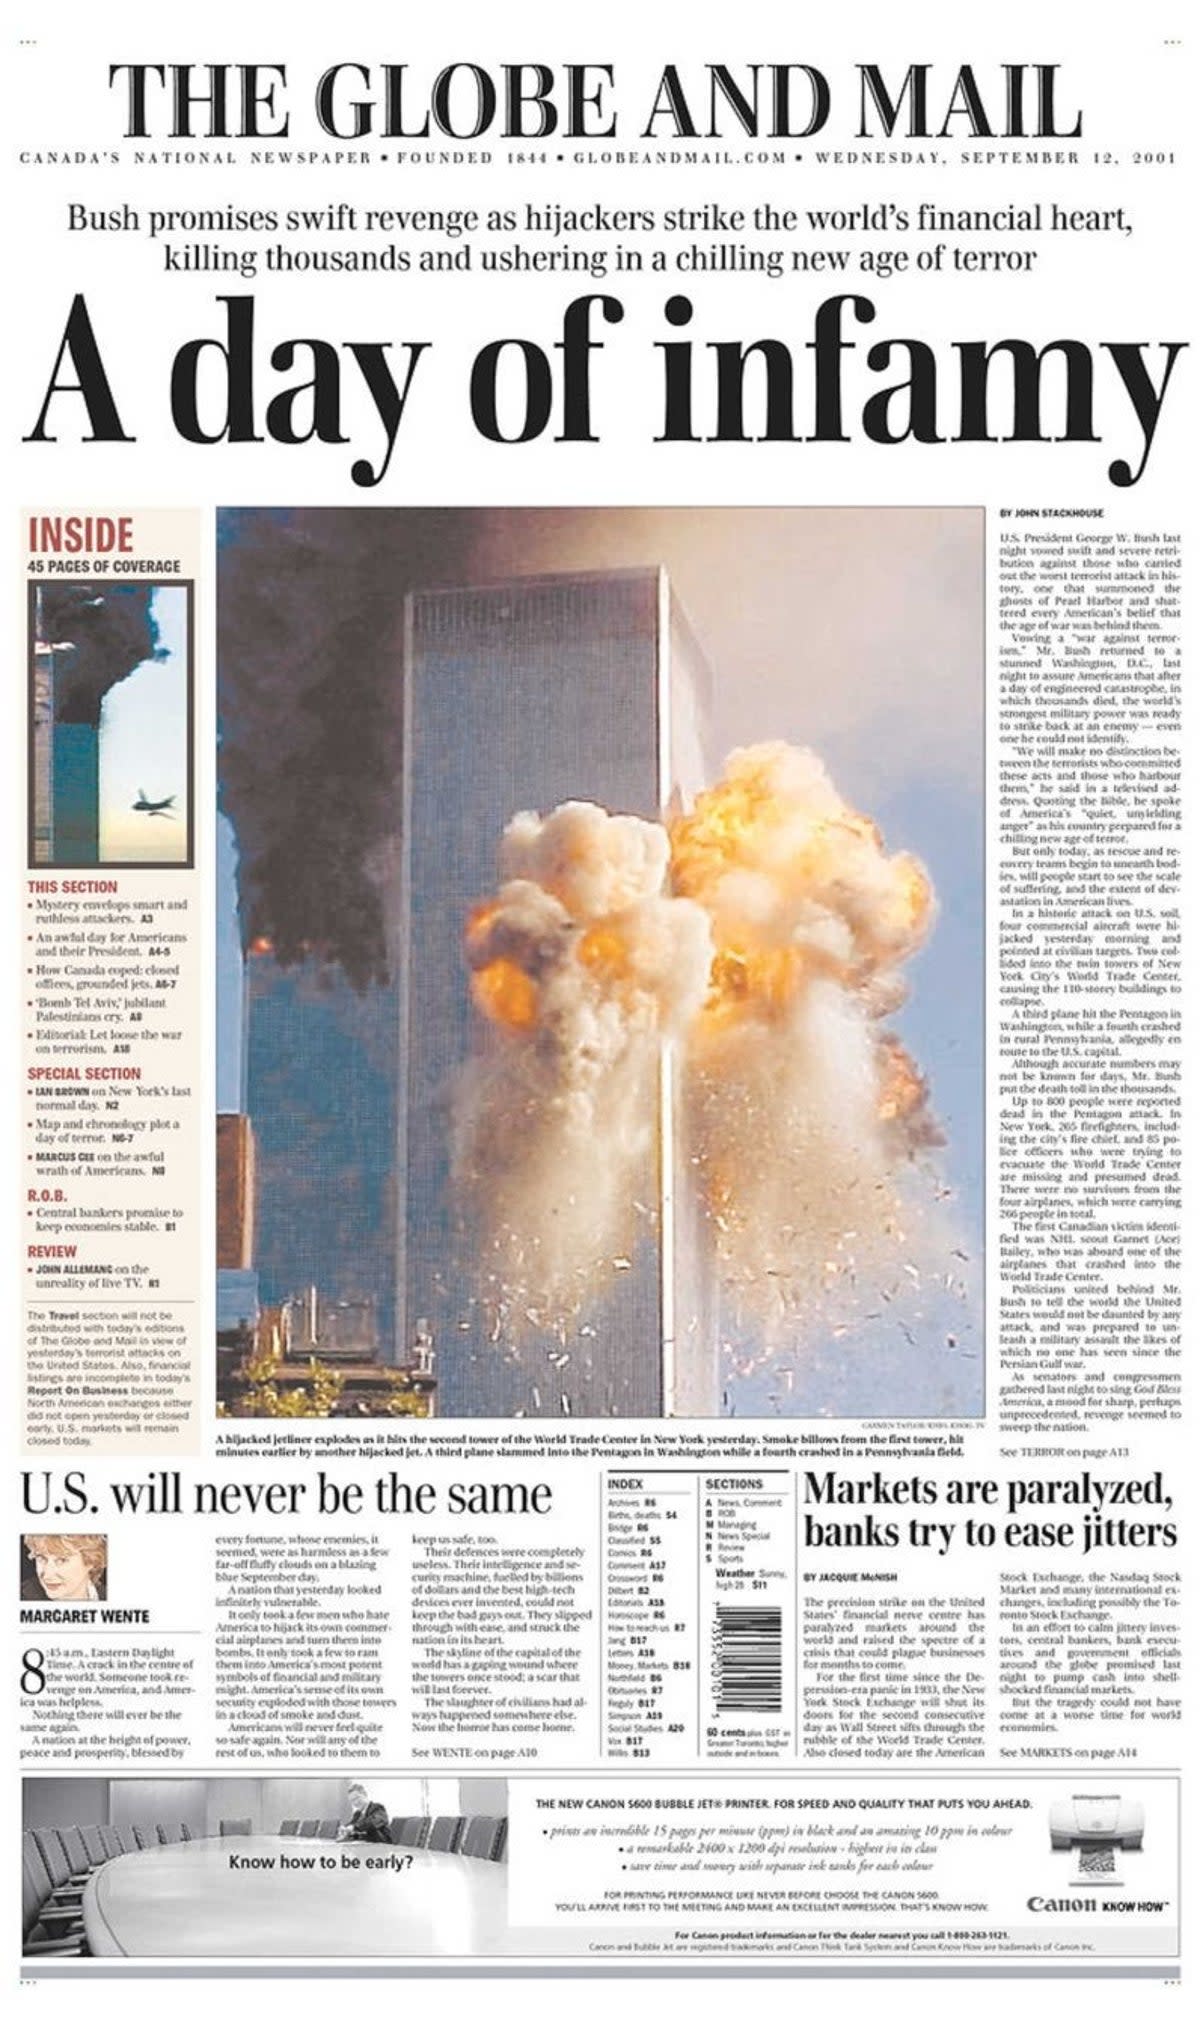 The Globe and Mail’s front page on 12 September, 2001 (The Globe and Mail)